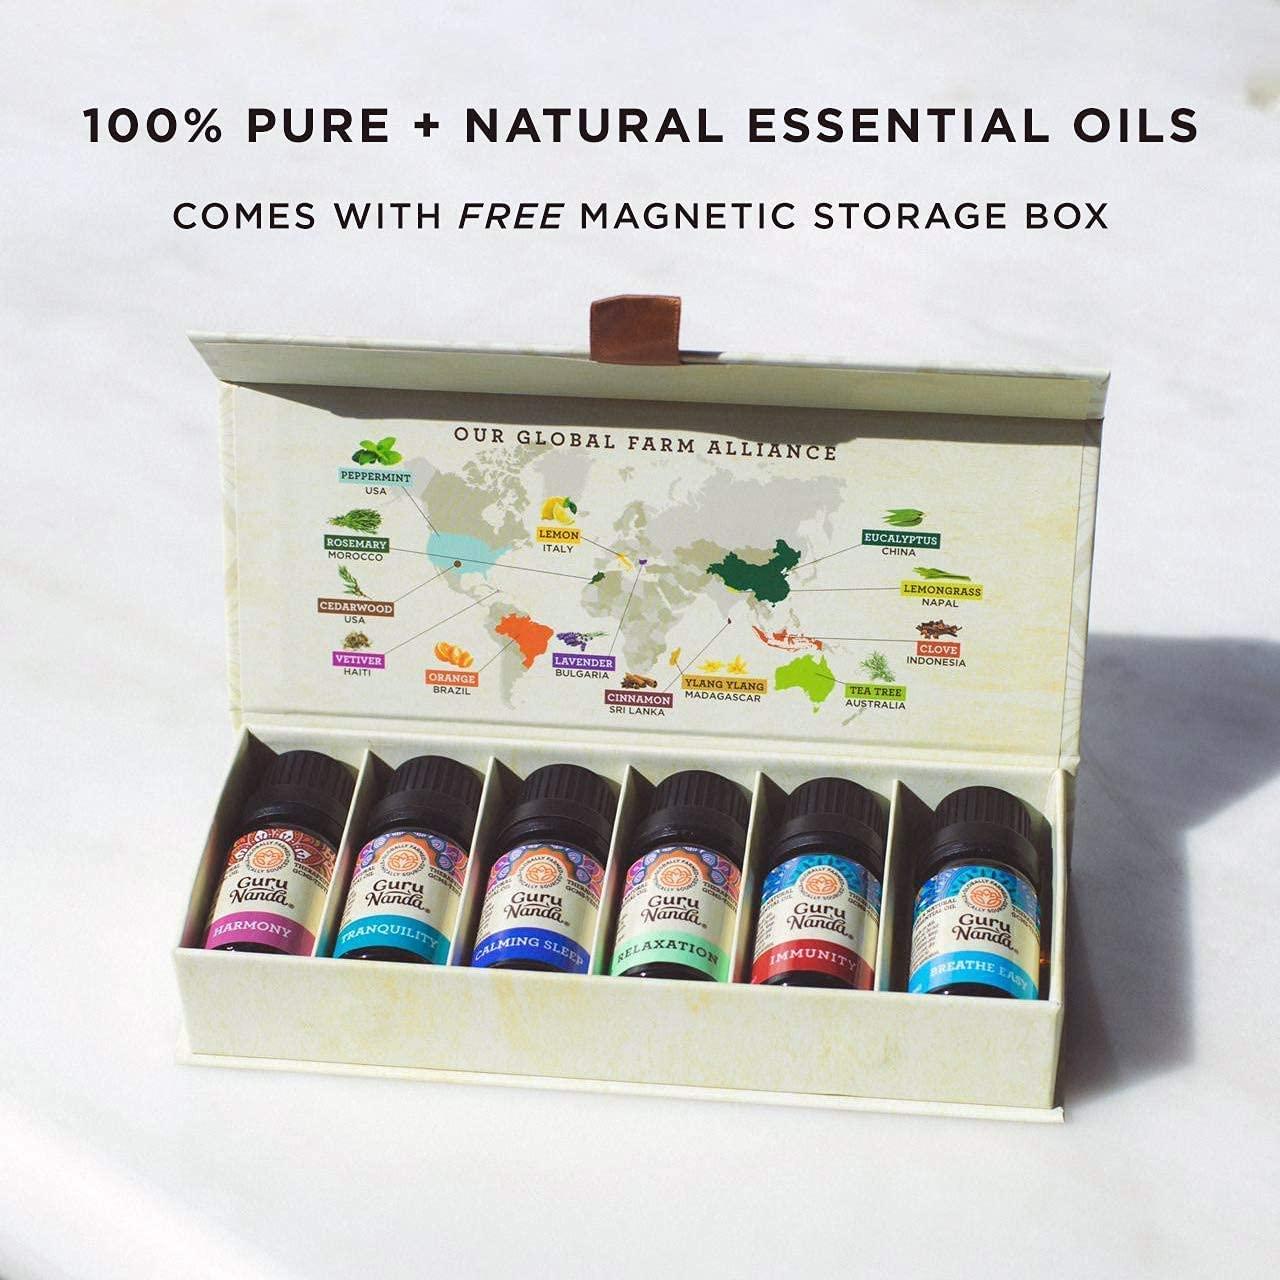 GuruNanda Essential Oils - Pure & Natural for Aromatherapy and